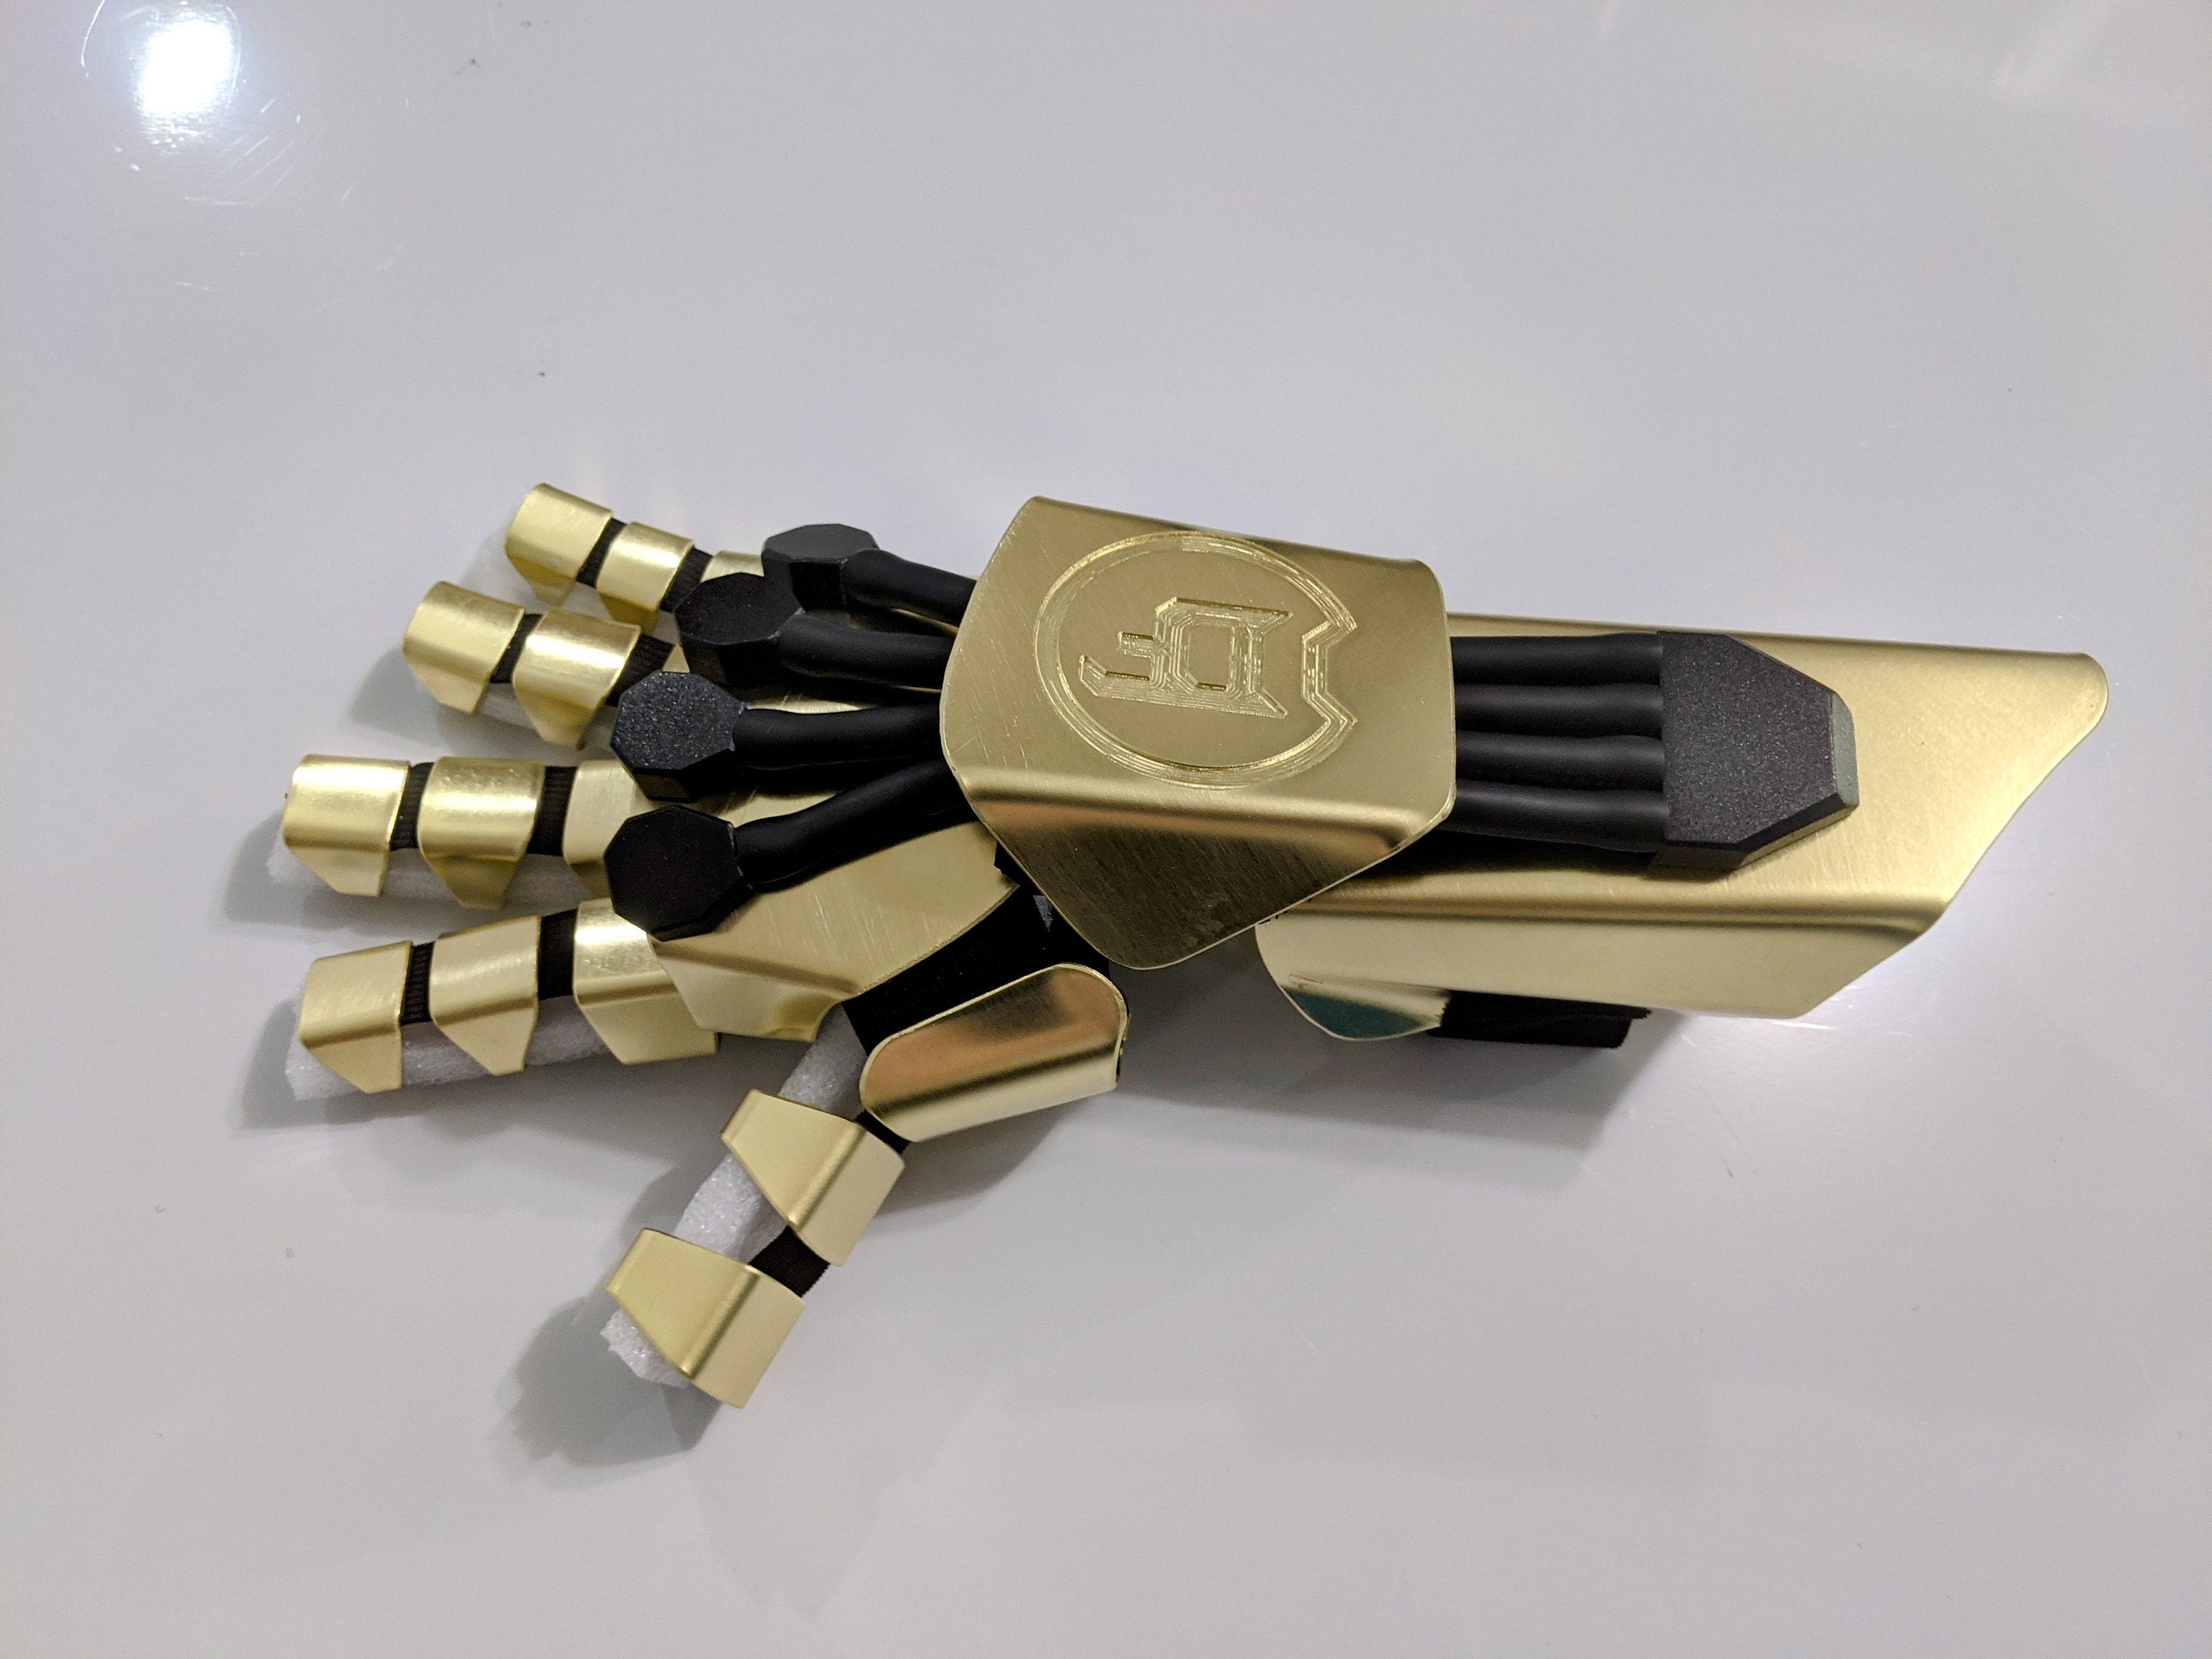 Cyber Armour Glove - Deluxe Brass Version